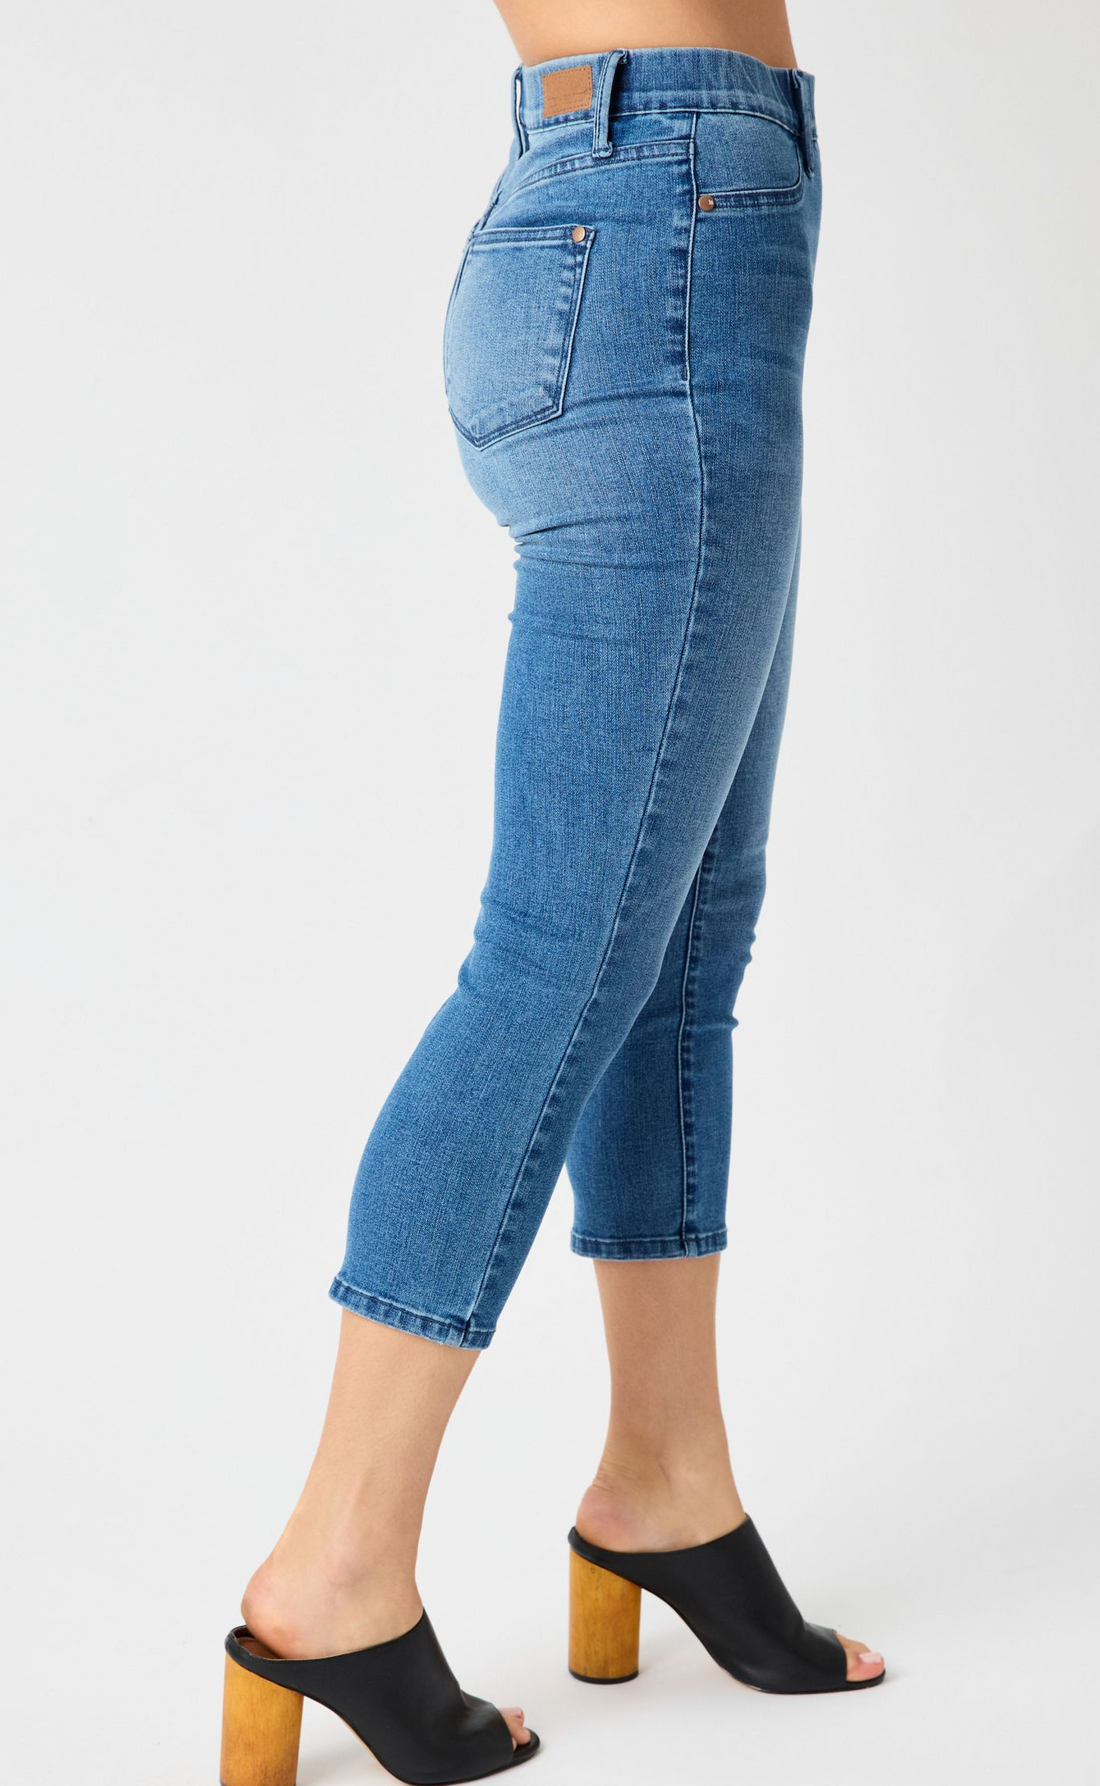 Judy Blue - Pull On Skinny Capri with Cooling Technology